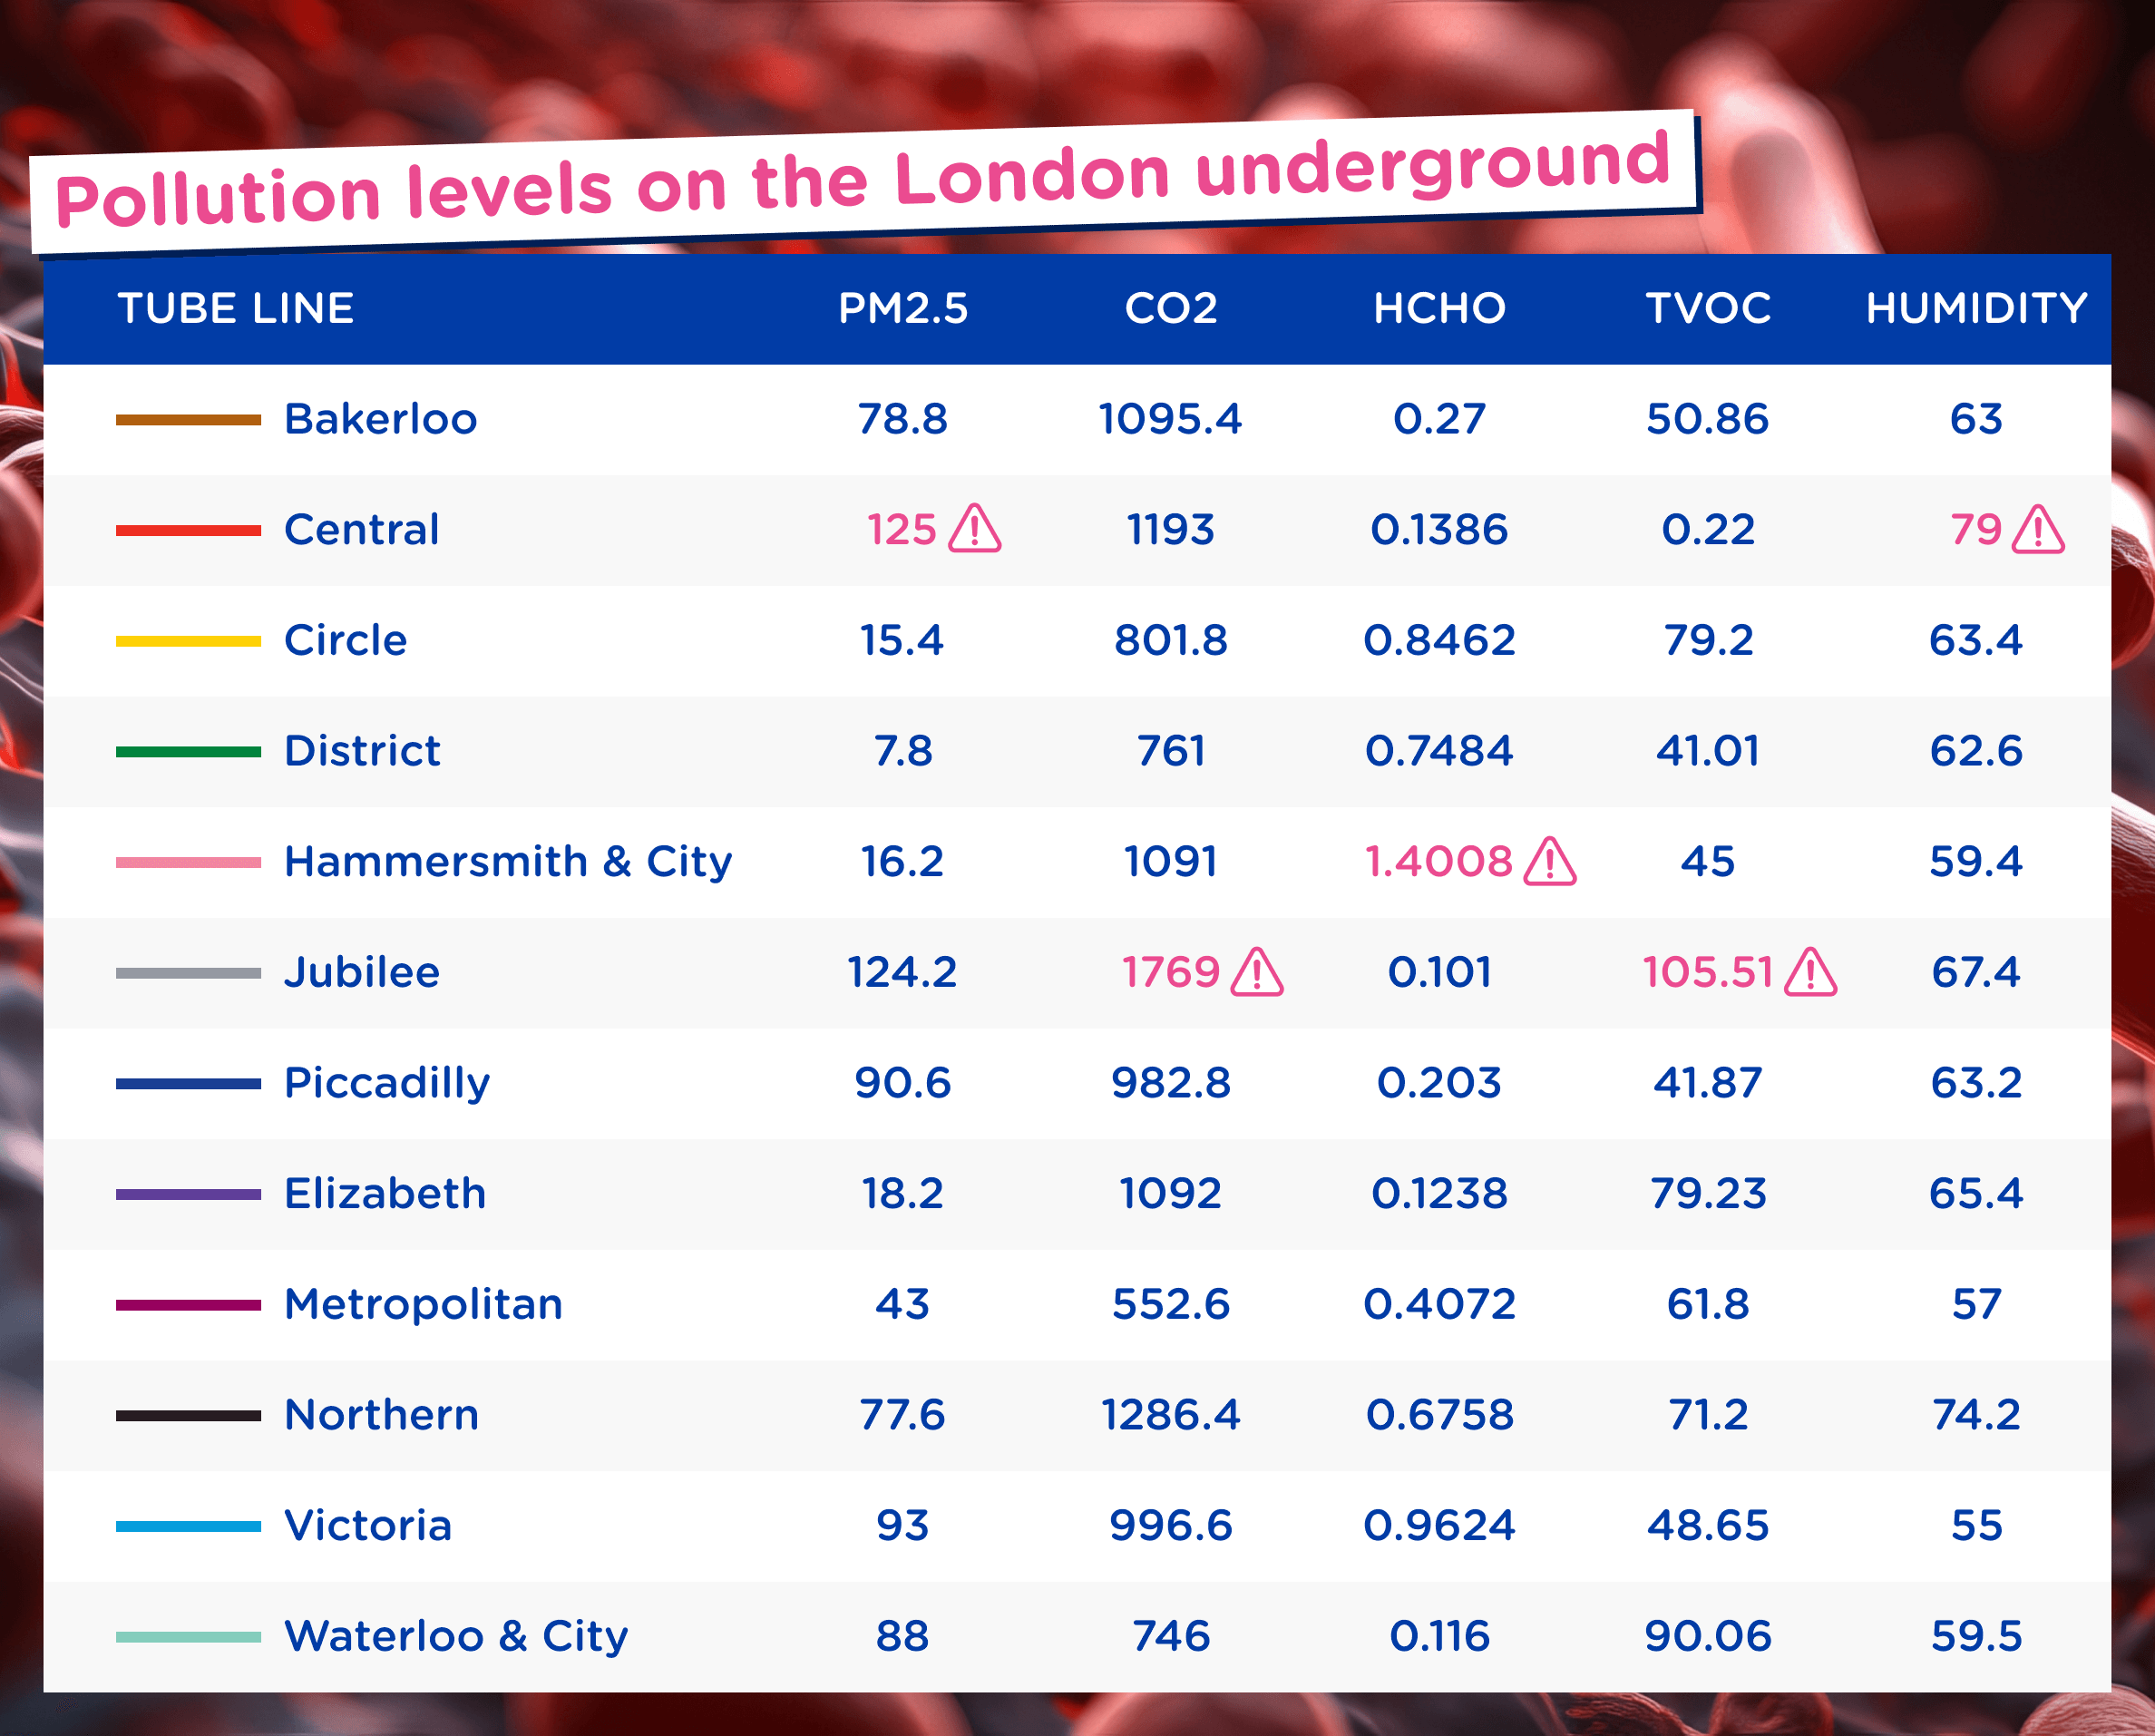 Data card showing information about Tube lines and levels of pollution